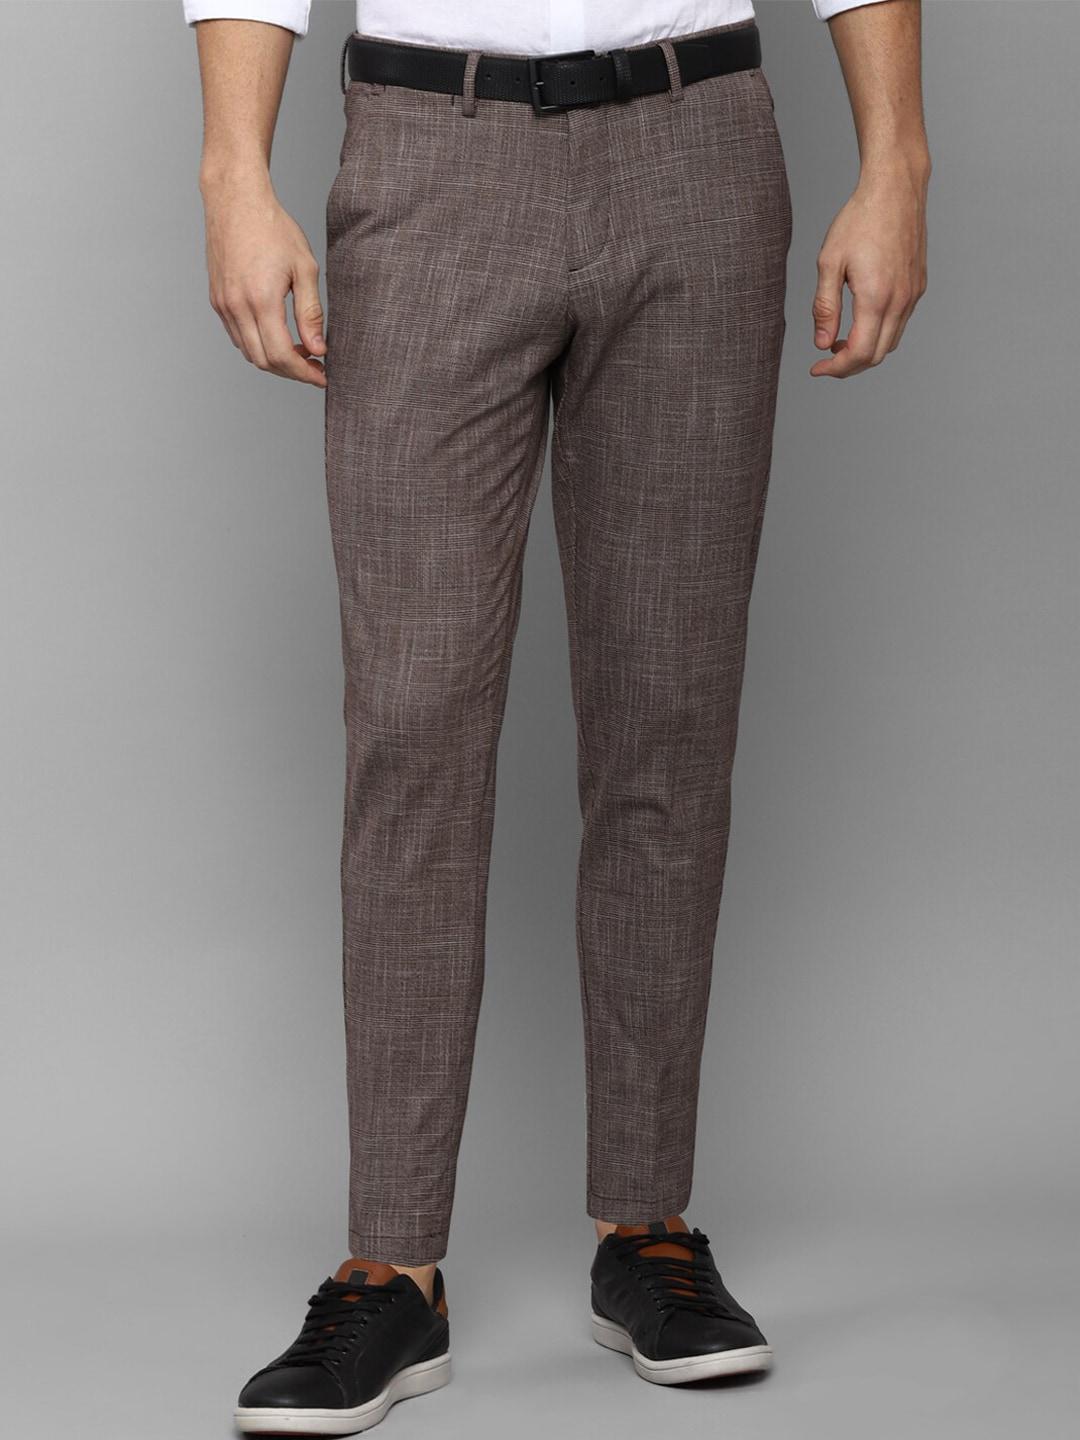 allen-solly-men-brown-checked-slim-fit-trousers